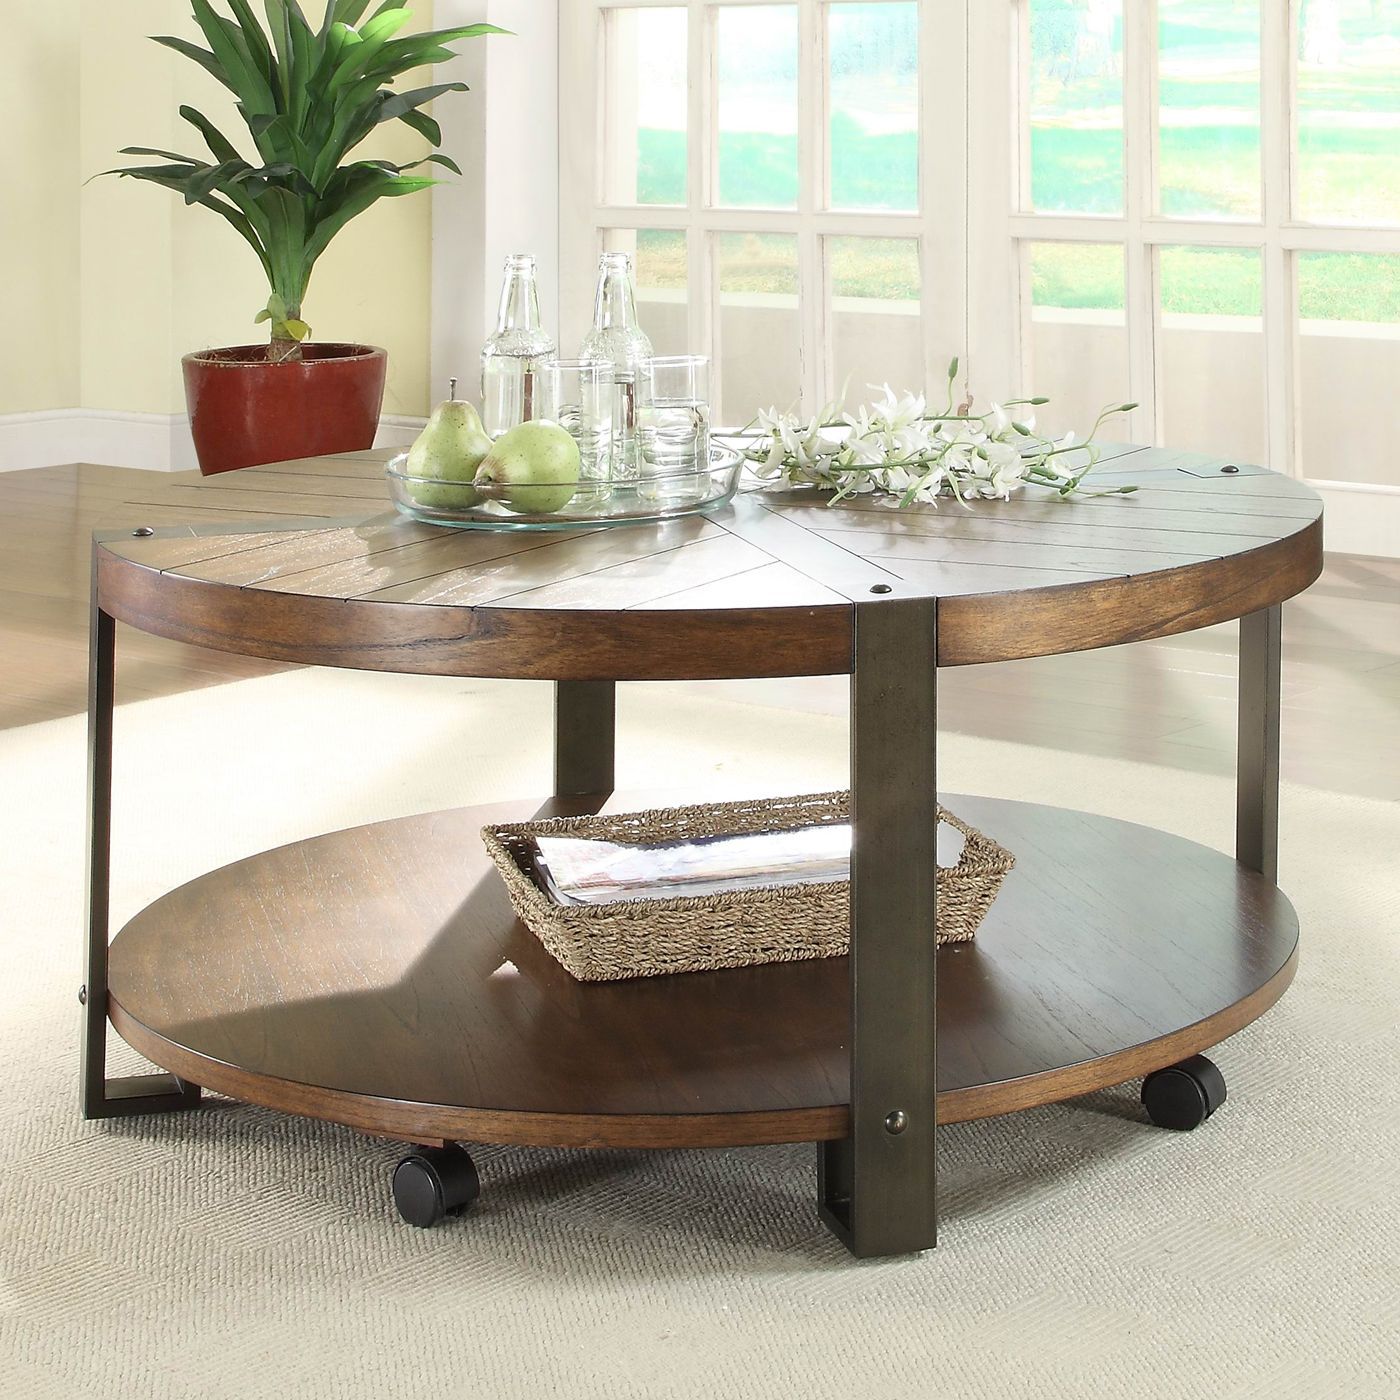 Homelegance 3438 01 Northwood Round Cocktail Table On Casters | Coffee Intended For Coffee Tables With Casters (View 13 of 15)